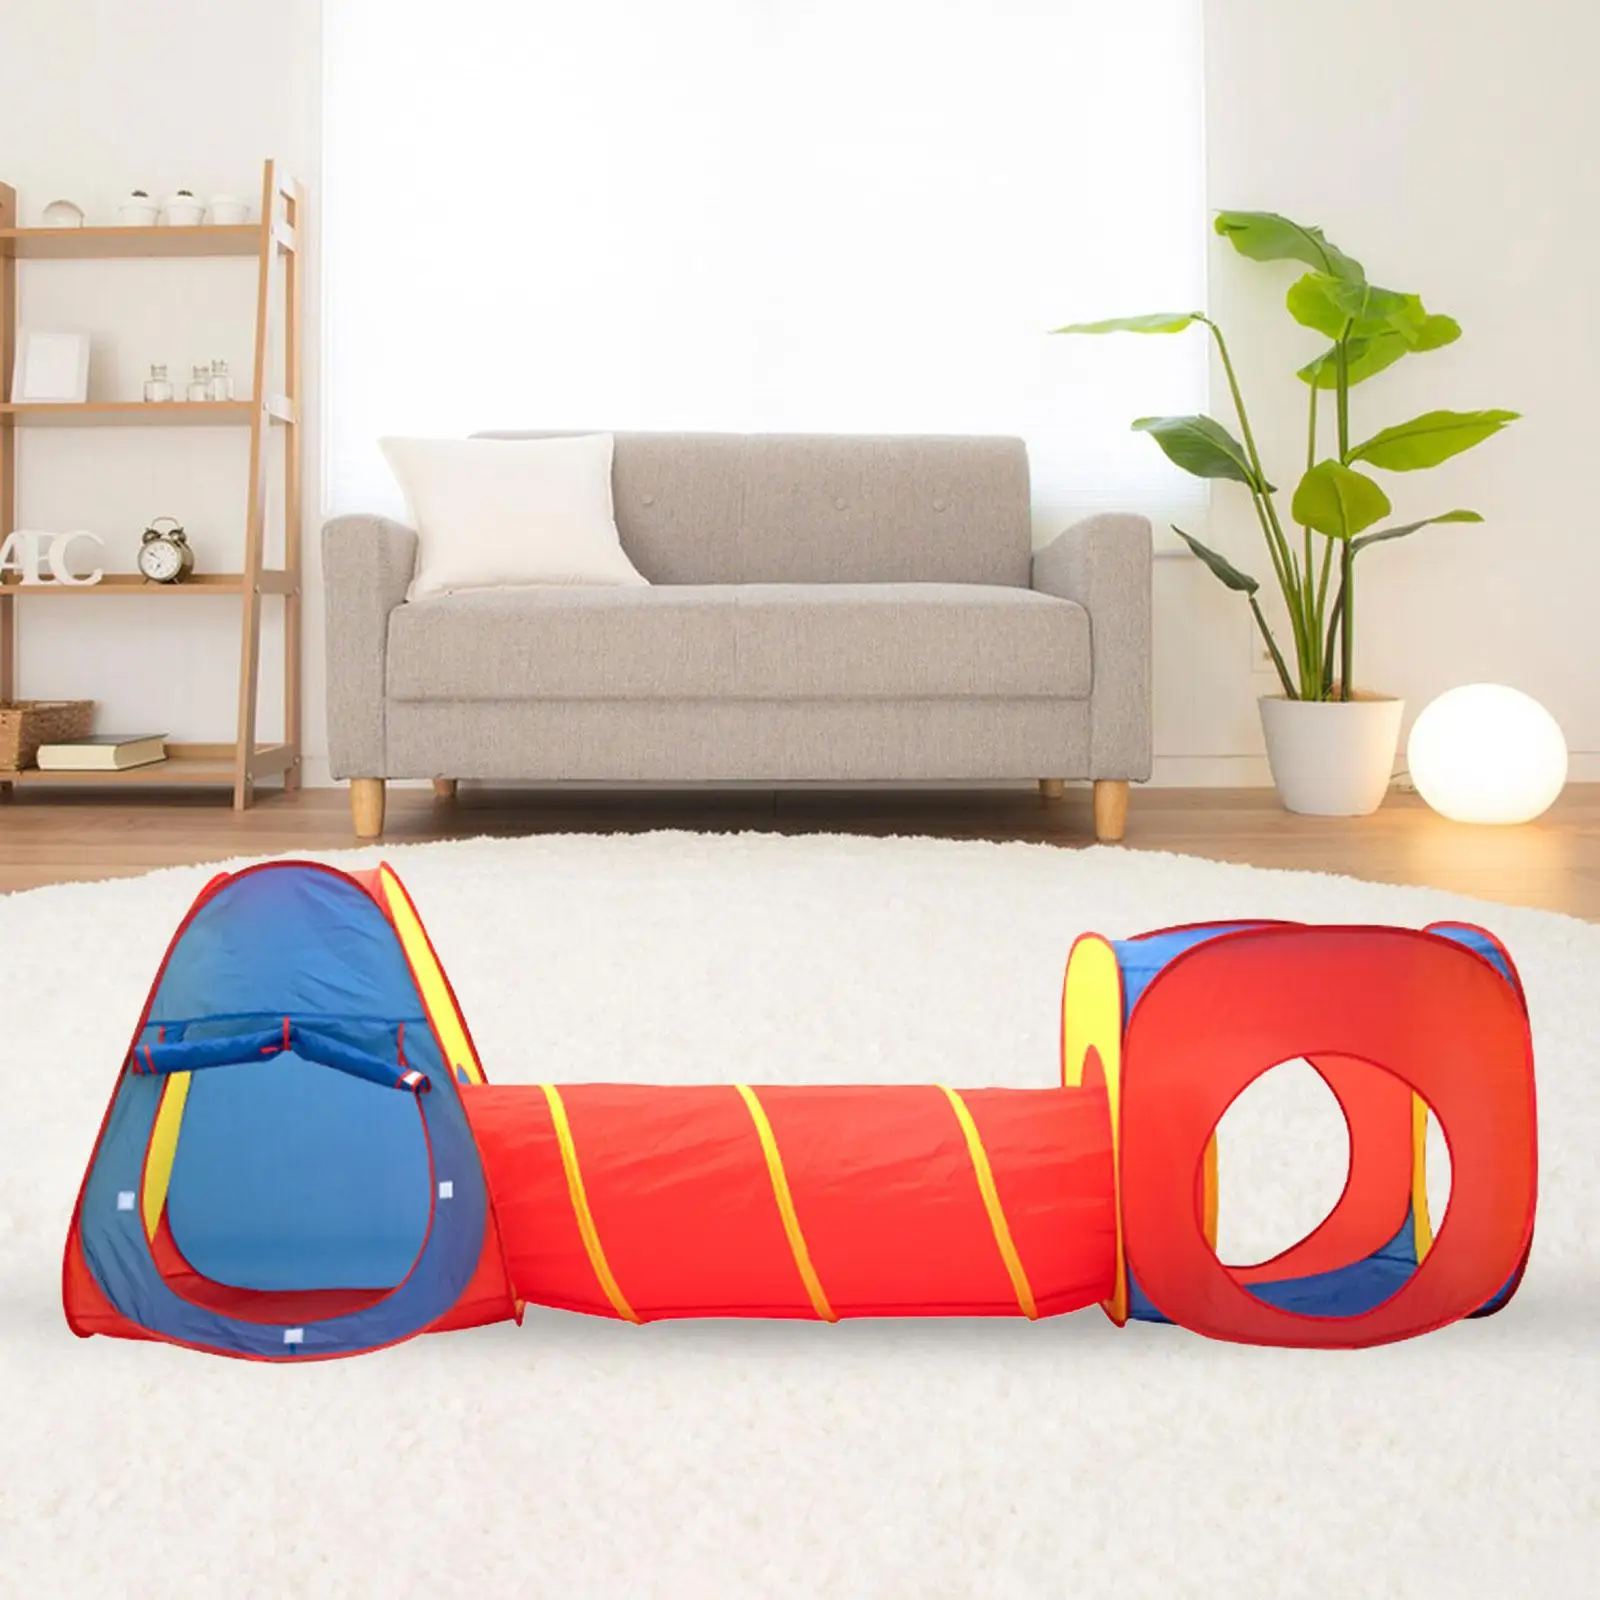 Kids Play Tents with Tunnels Also for Pets Indoor Outdoor Games 3 in 1 Playhouse for Daycare Playground, Backyard, Infants